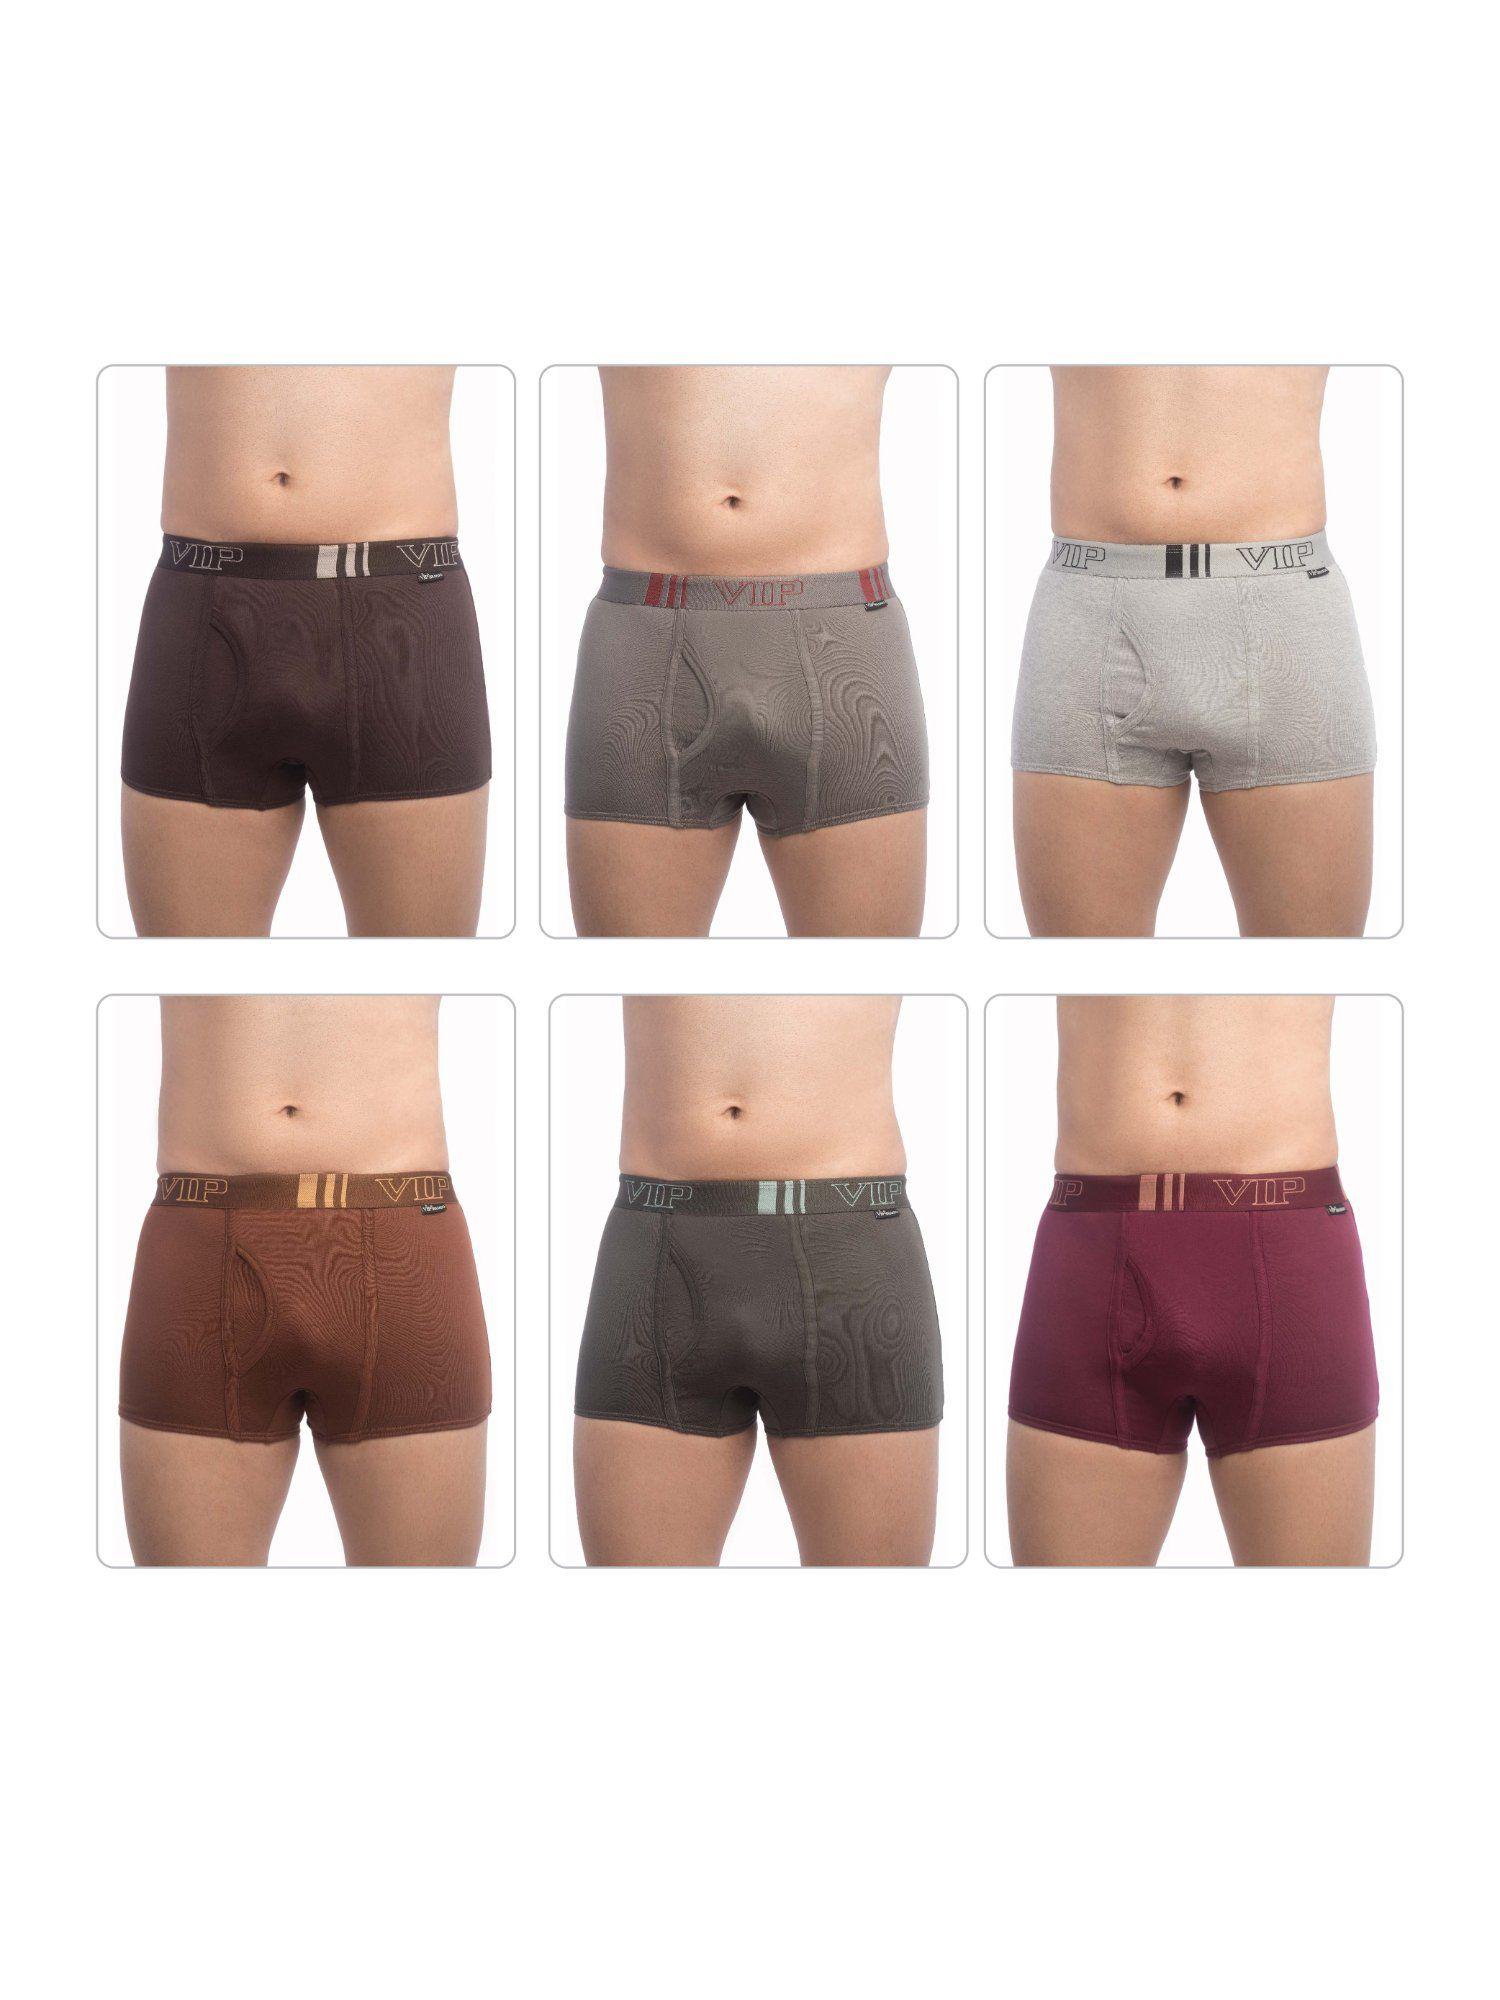 mens cotton brando plain trunks, colors & prints may vary (pack of 6)